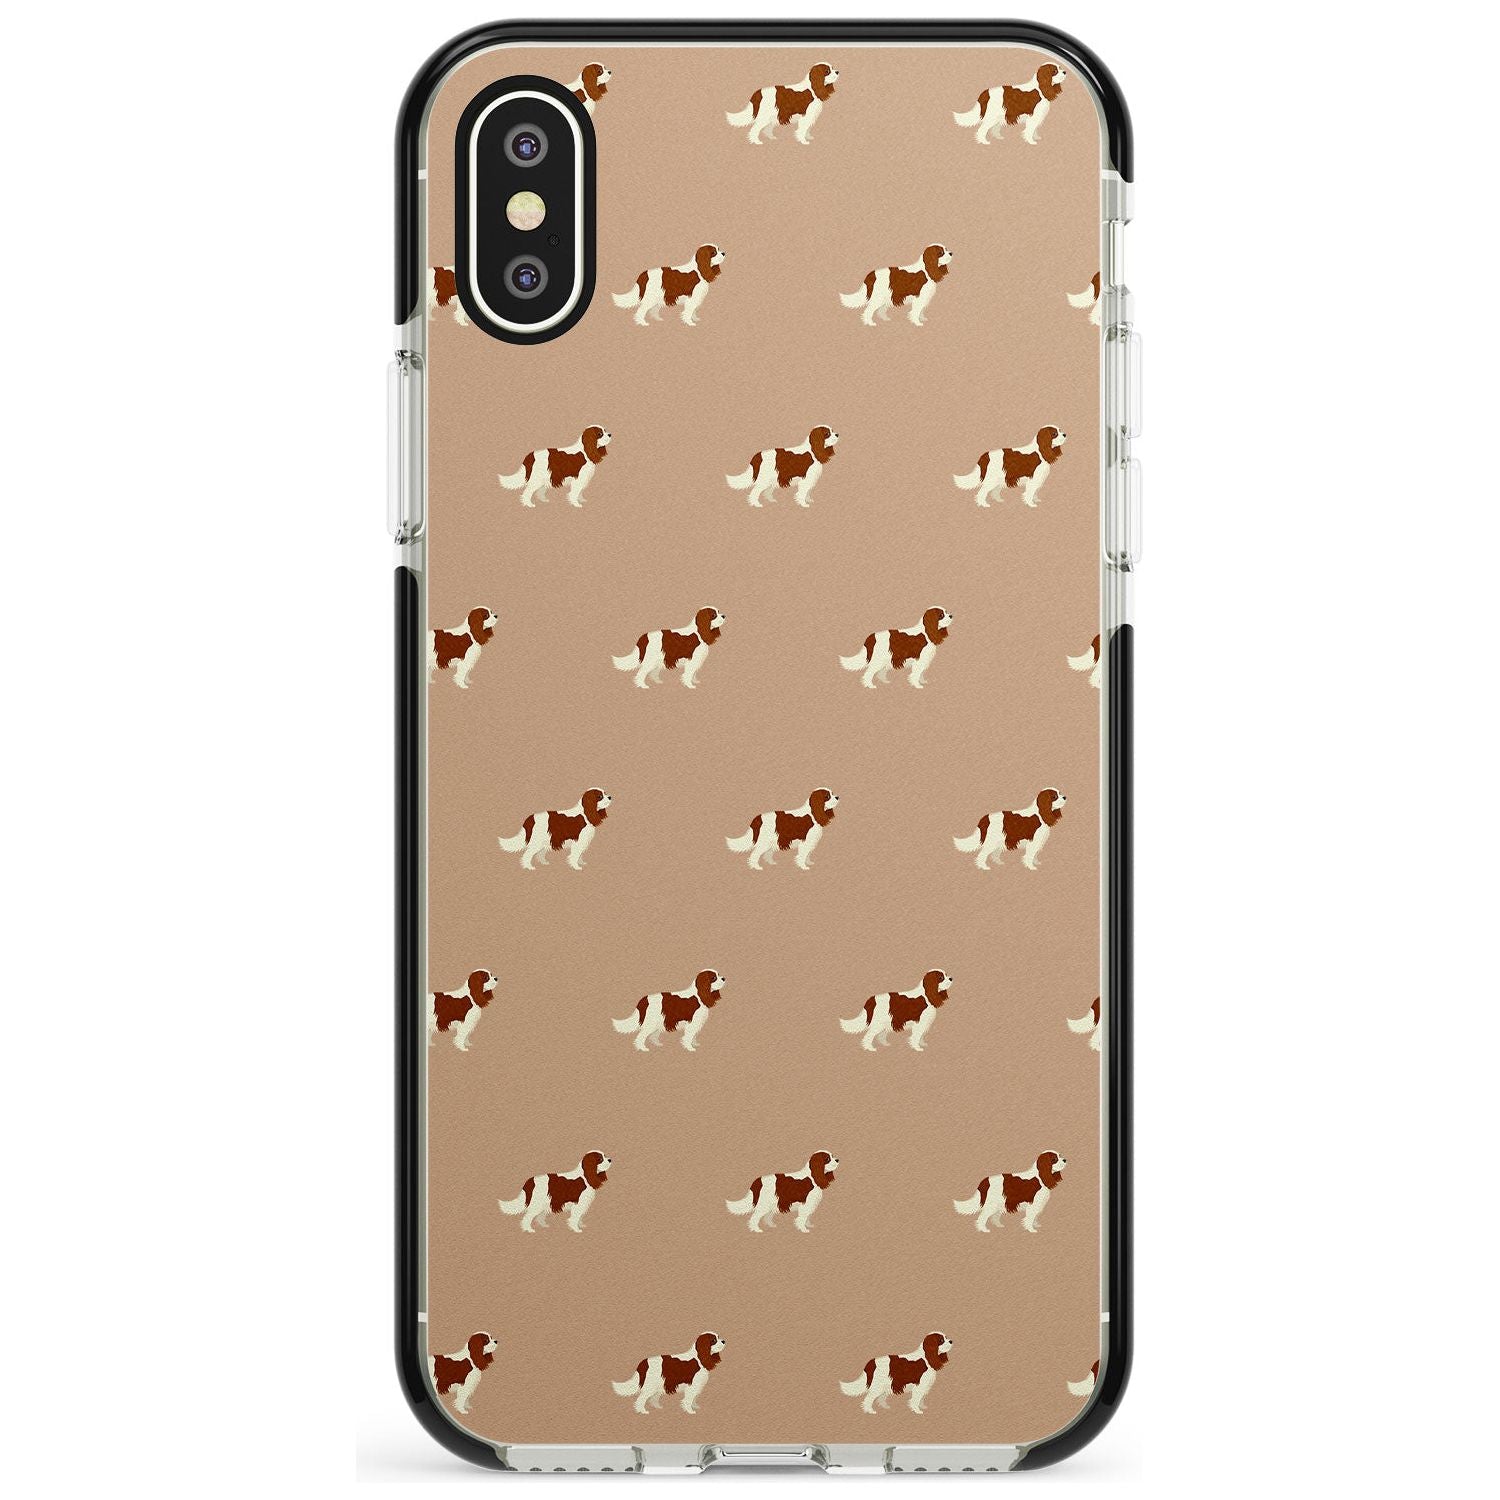 Cavalier King Charles Spaniel Pattern Black Impact Phone Case for iPhone X XS Max XR